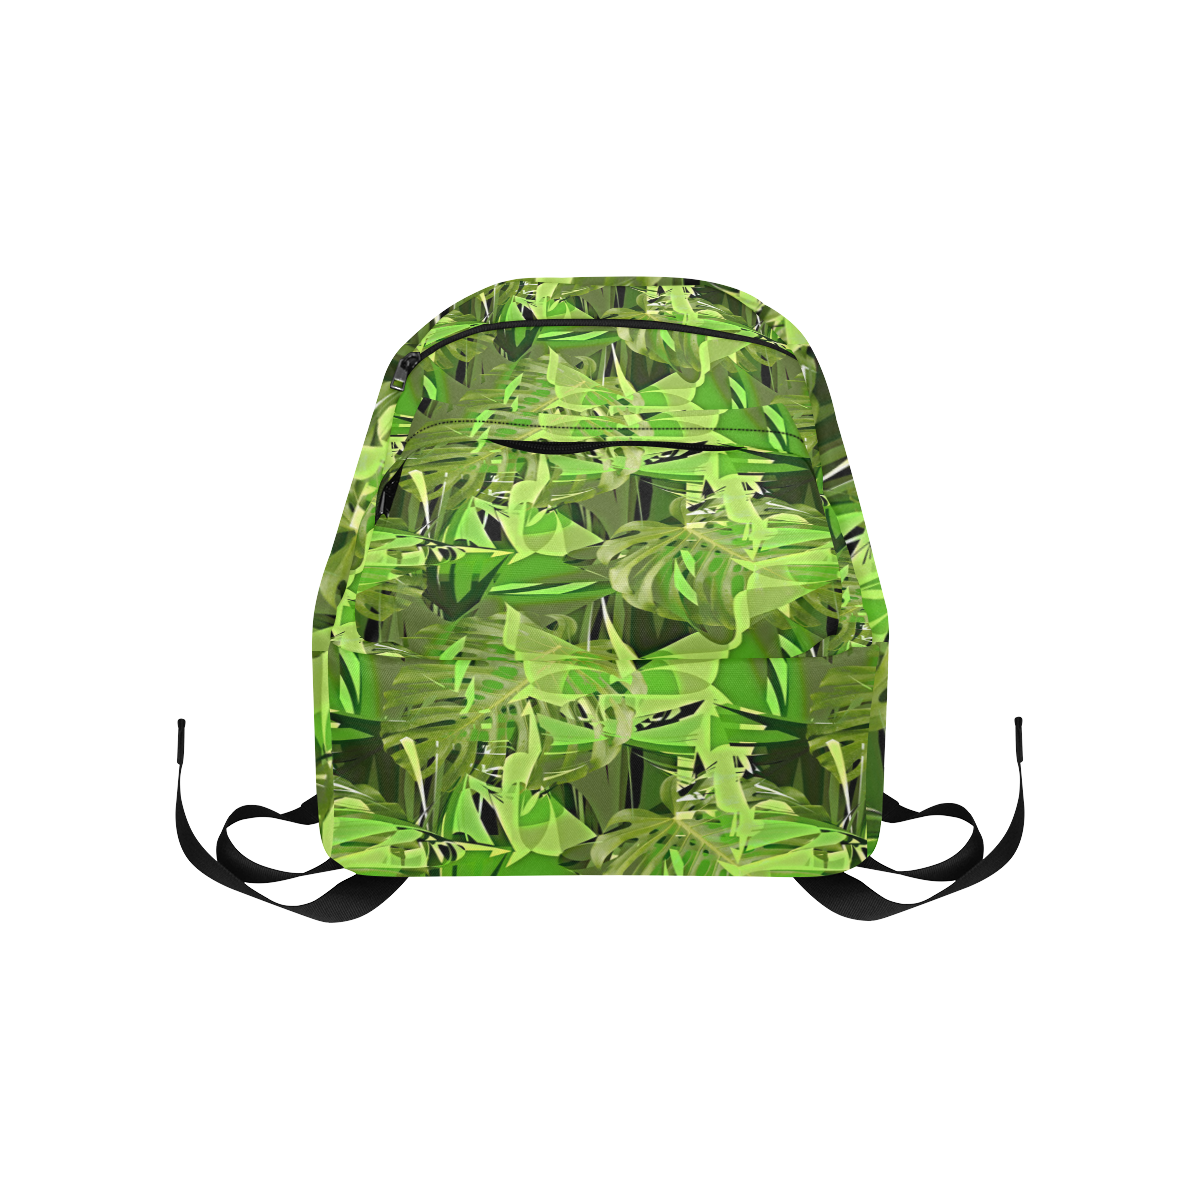 Tropical Jungle Leaves Camouflage Large Capacity Travel Backpack (Model 1691)